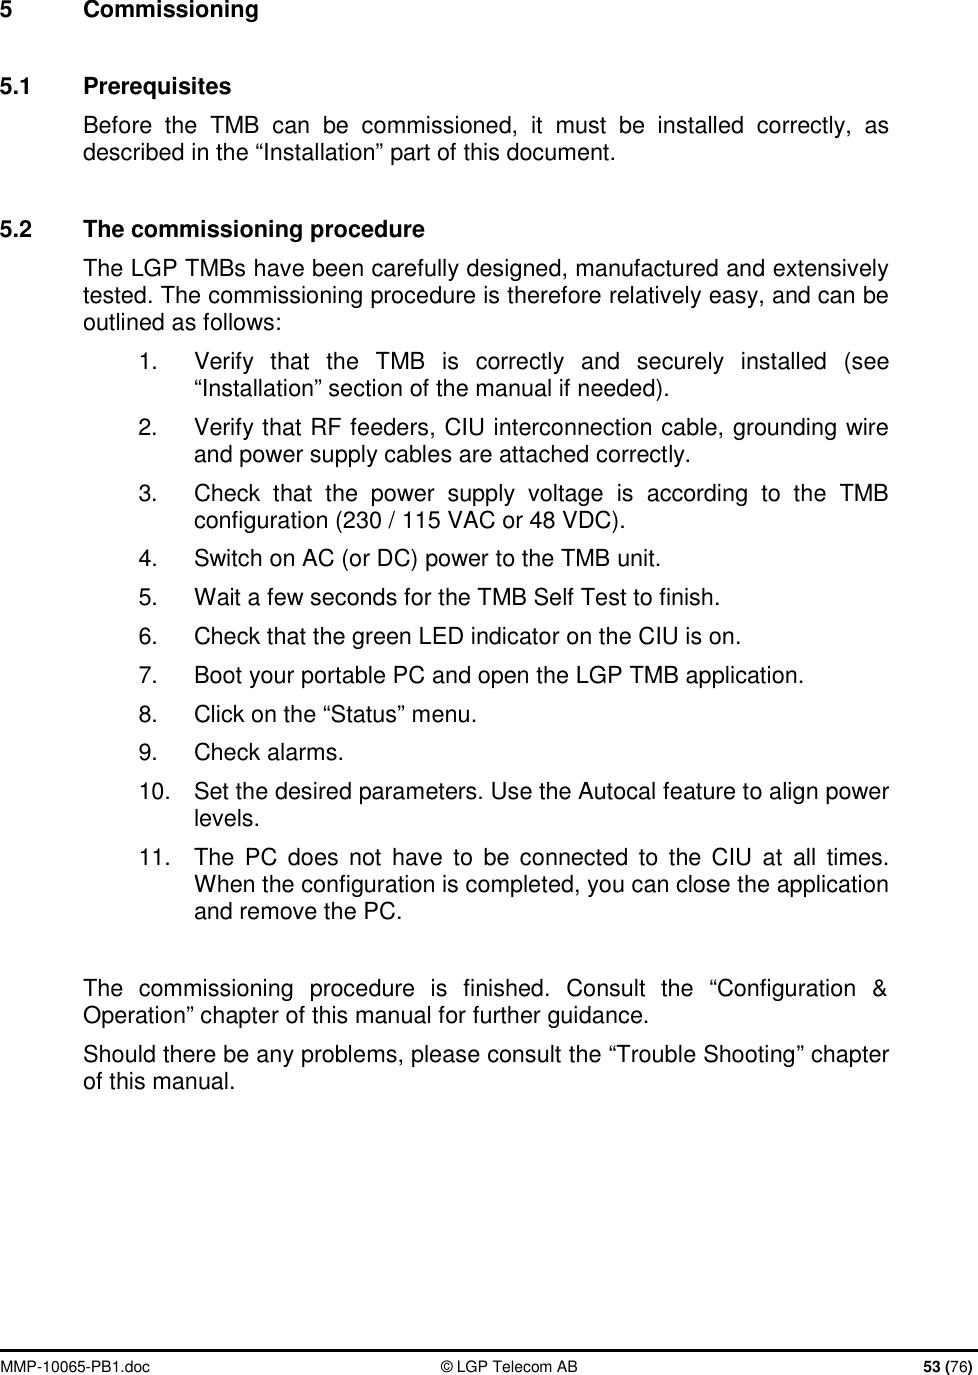  MMP-10065-PB1.doc  © LGP Telecom AB  53 (76)  5  Commissioning  5.1  Prerequisites Before the TMB can be commissioned, it must be installed correctly, as described in the “Installation” part of this document.  5.2  The commissioning procedure The LGP TMBs have been carefully designed, manufactured and extensively tested. The commissioning procedure is therefore relatively easy, and can be outlined as follows: 1.  Verify that the TMB is correctly and securely installed (see “Installation” section of the manual if needed). 2.  Verify that RF feeders, CIU interconnection cable, grounding wire and power supply cables are attached correctly. 3.  Check that the power supply voltage is according to the TMB configuration (230 / 115 VAC or 48 VDC). 4.  Switch on AC (or DC) power to the TMB unit. 5.  Wait a few seconds for the TMB Self Test to finish. 6.  Check that the green LED indicator on the CIU is on. 7.  Boot your portable PC and open the LGP TMB application. 8.  Click on the “Status” menu. 9.  Check alarms. 10.  Set the desired parameters. Use the Autocal feature to align power levels. 11.  The PC does not have to be connected to the CIU at all times. When the configuration is completed, you can close the application and remove the PC.  The commissioning procedure is finished. Consult the “Configuration &amp; Operation” chapter of this manual for further guidance. Should there be any problems, please consult the “Trouble Shooting” chapter of this manual.     